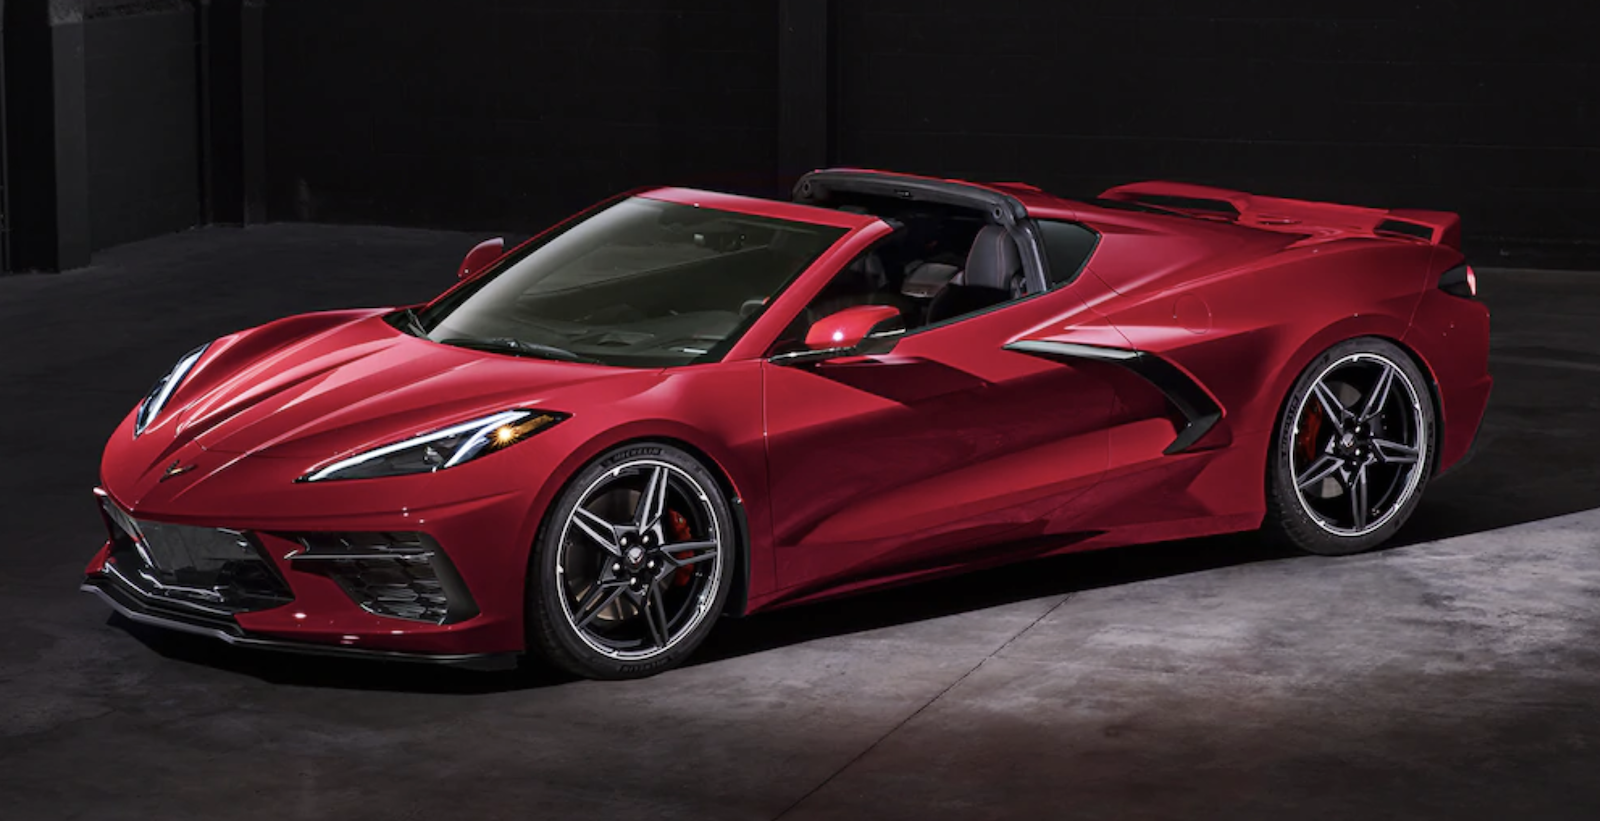 Why Is The New Chevrolet Corvette Selling So Well?